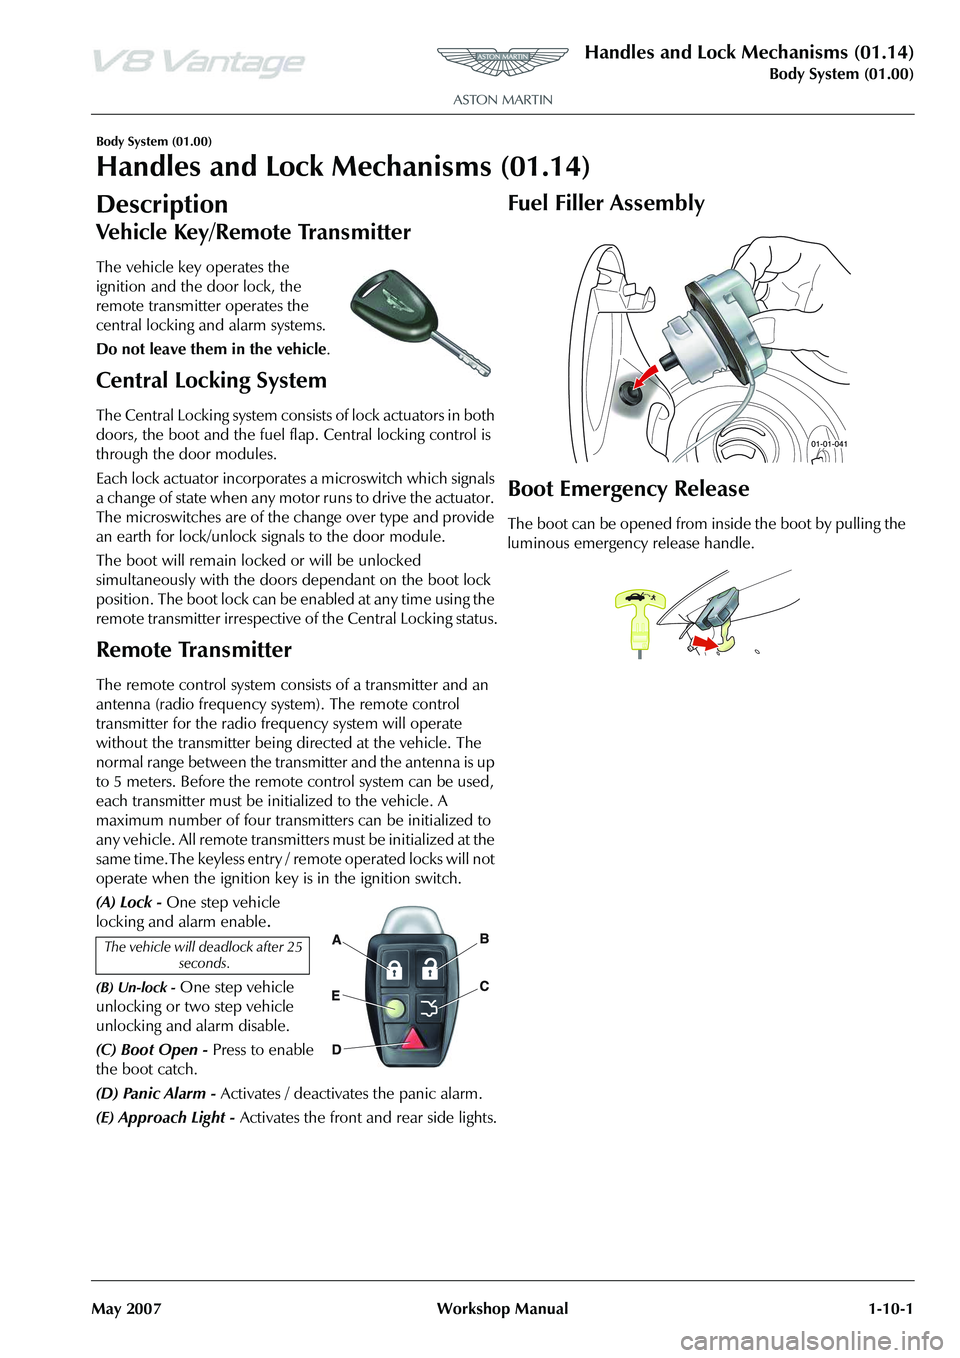 ASTON MARTIN V8 VANTAGE 2010  Workshop Manual Handles and Lock Mechanisms (01.14)
Body System (01.00)
May 2007 Workshop Manual 1-10-1
Body System (01.00)
Handles and Lock Mechanisms (01.14)
Description
The vehicle key operates the 
ignition and t